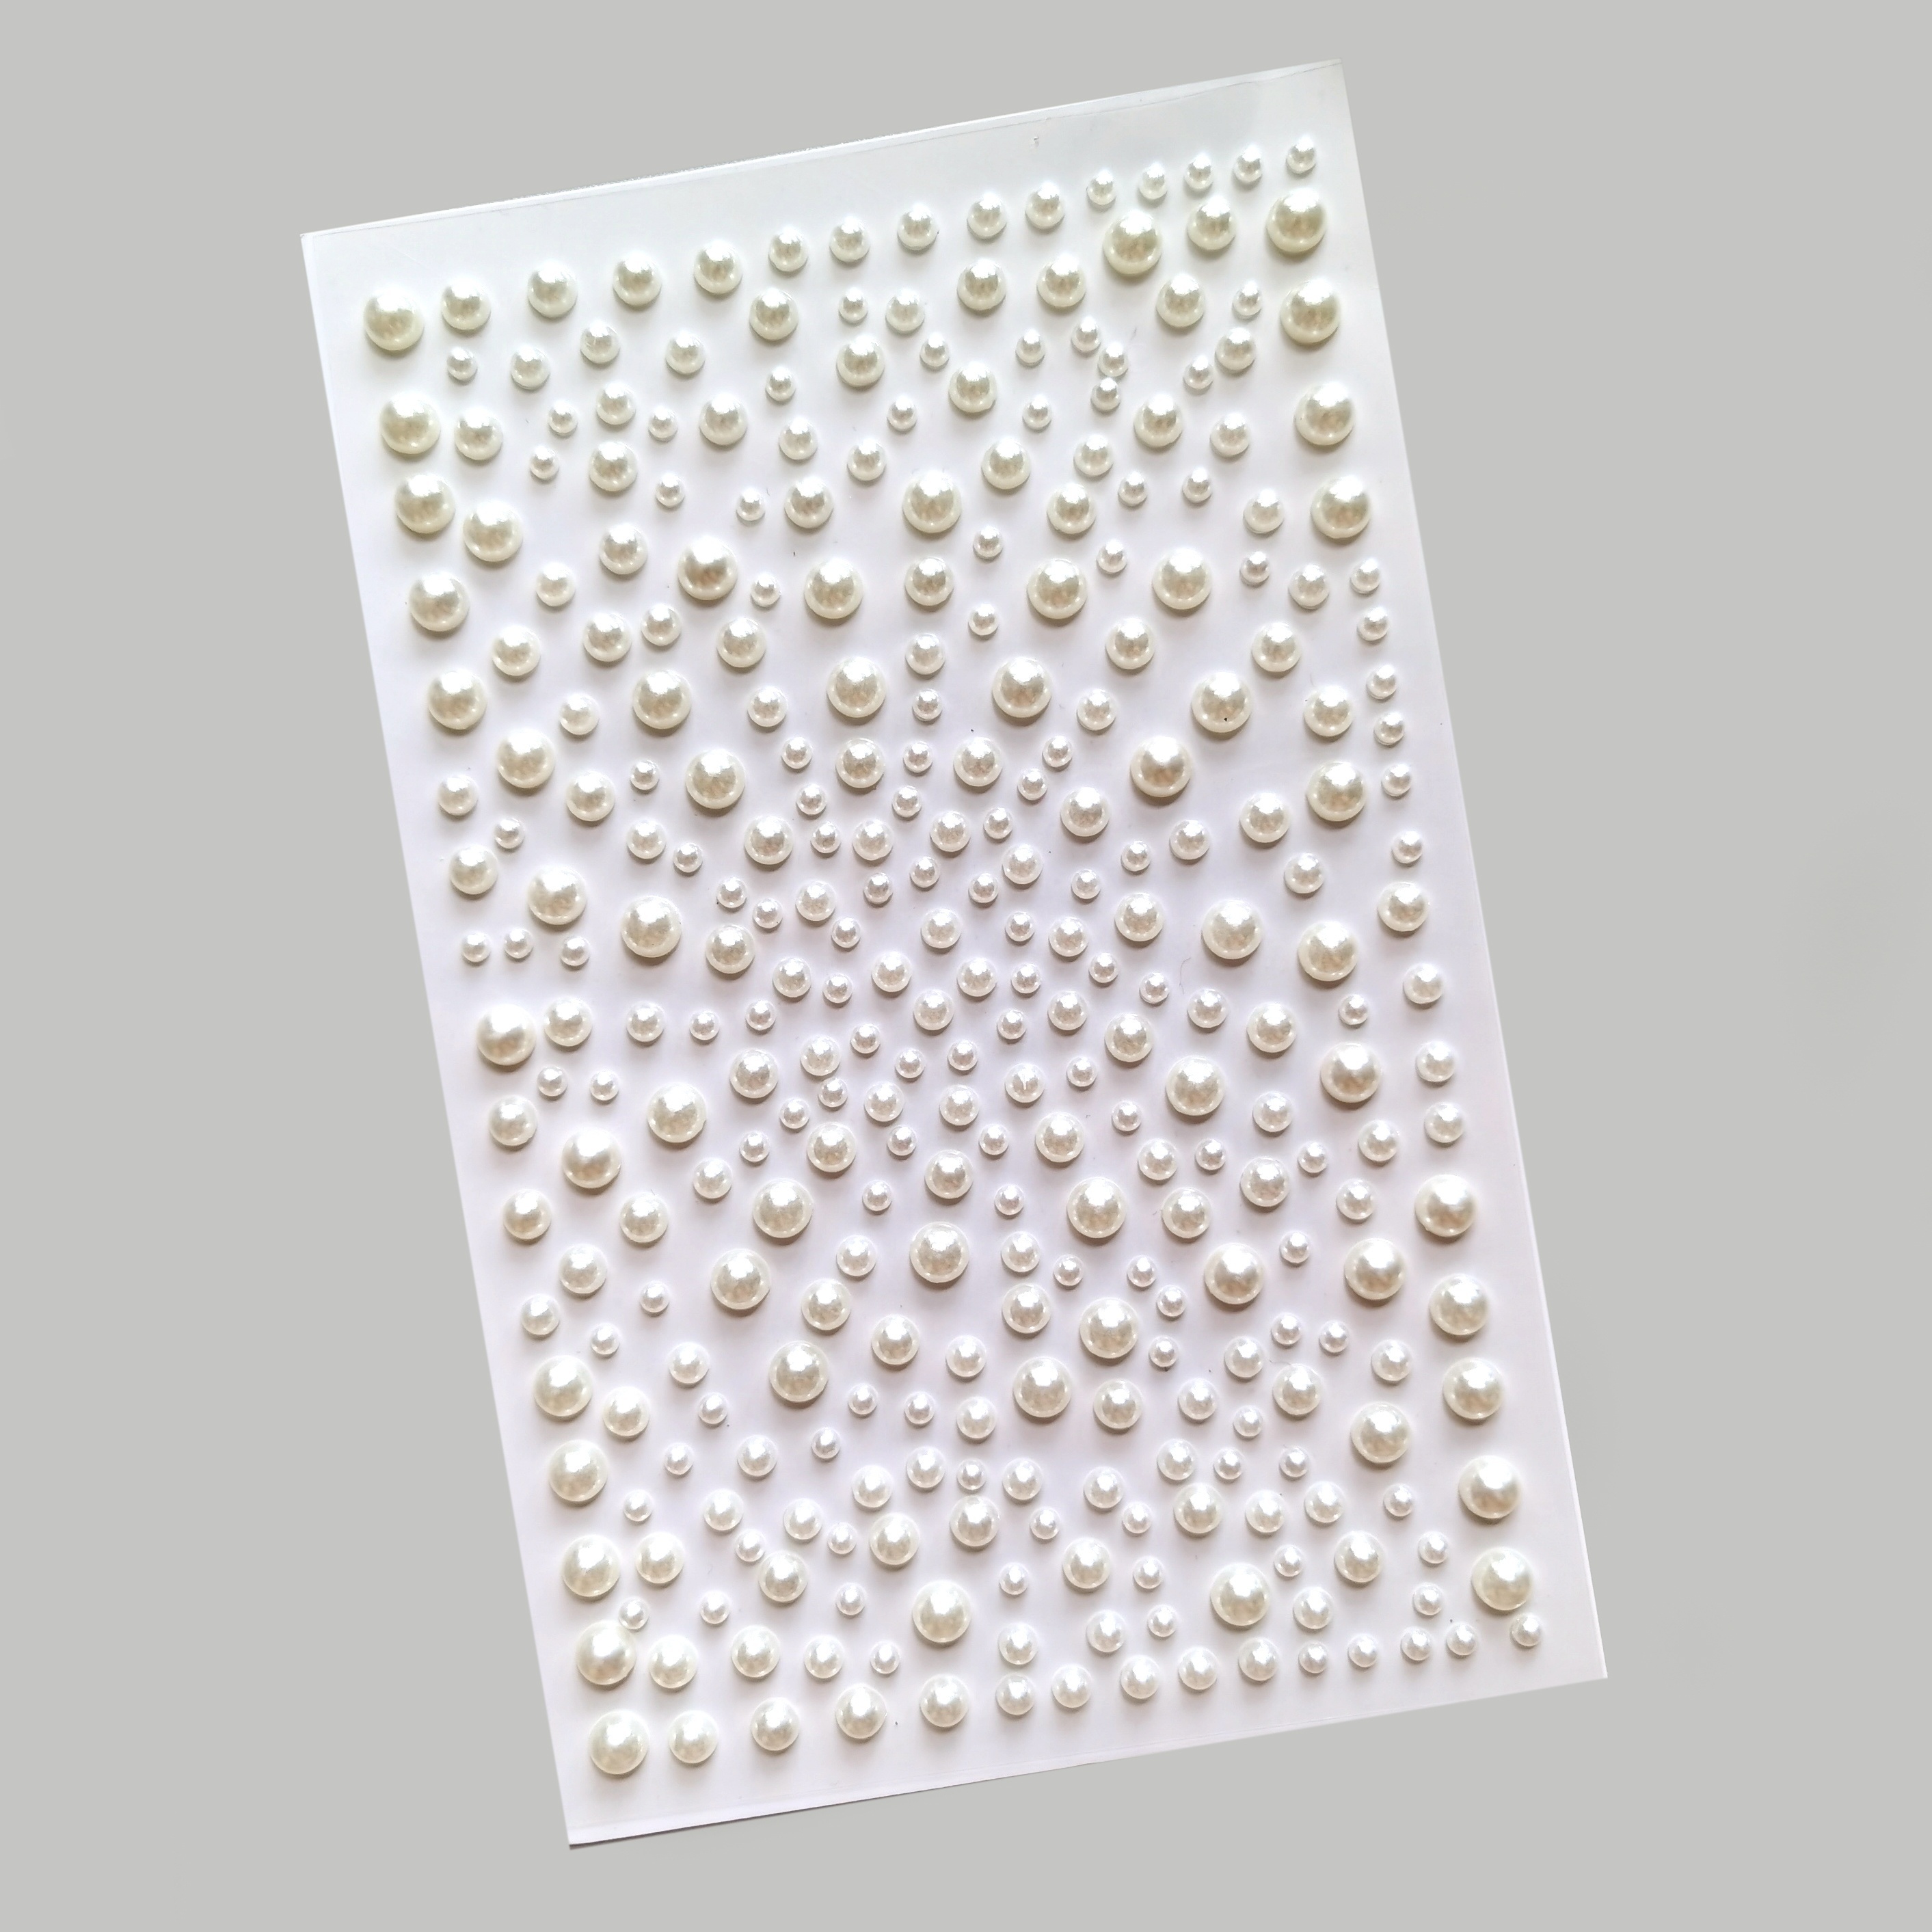  Senkary 840 Pieces (5 Sizes) Self-Adhesive Hair Pearl Stickers  Flat Back Pearl Sheets for Crafts, Wedding, Face, Makeup